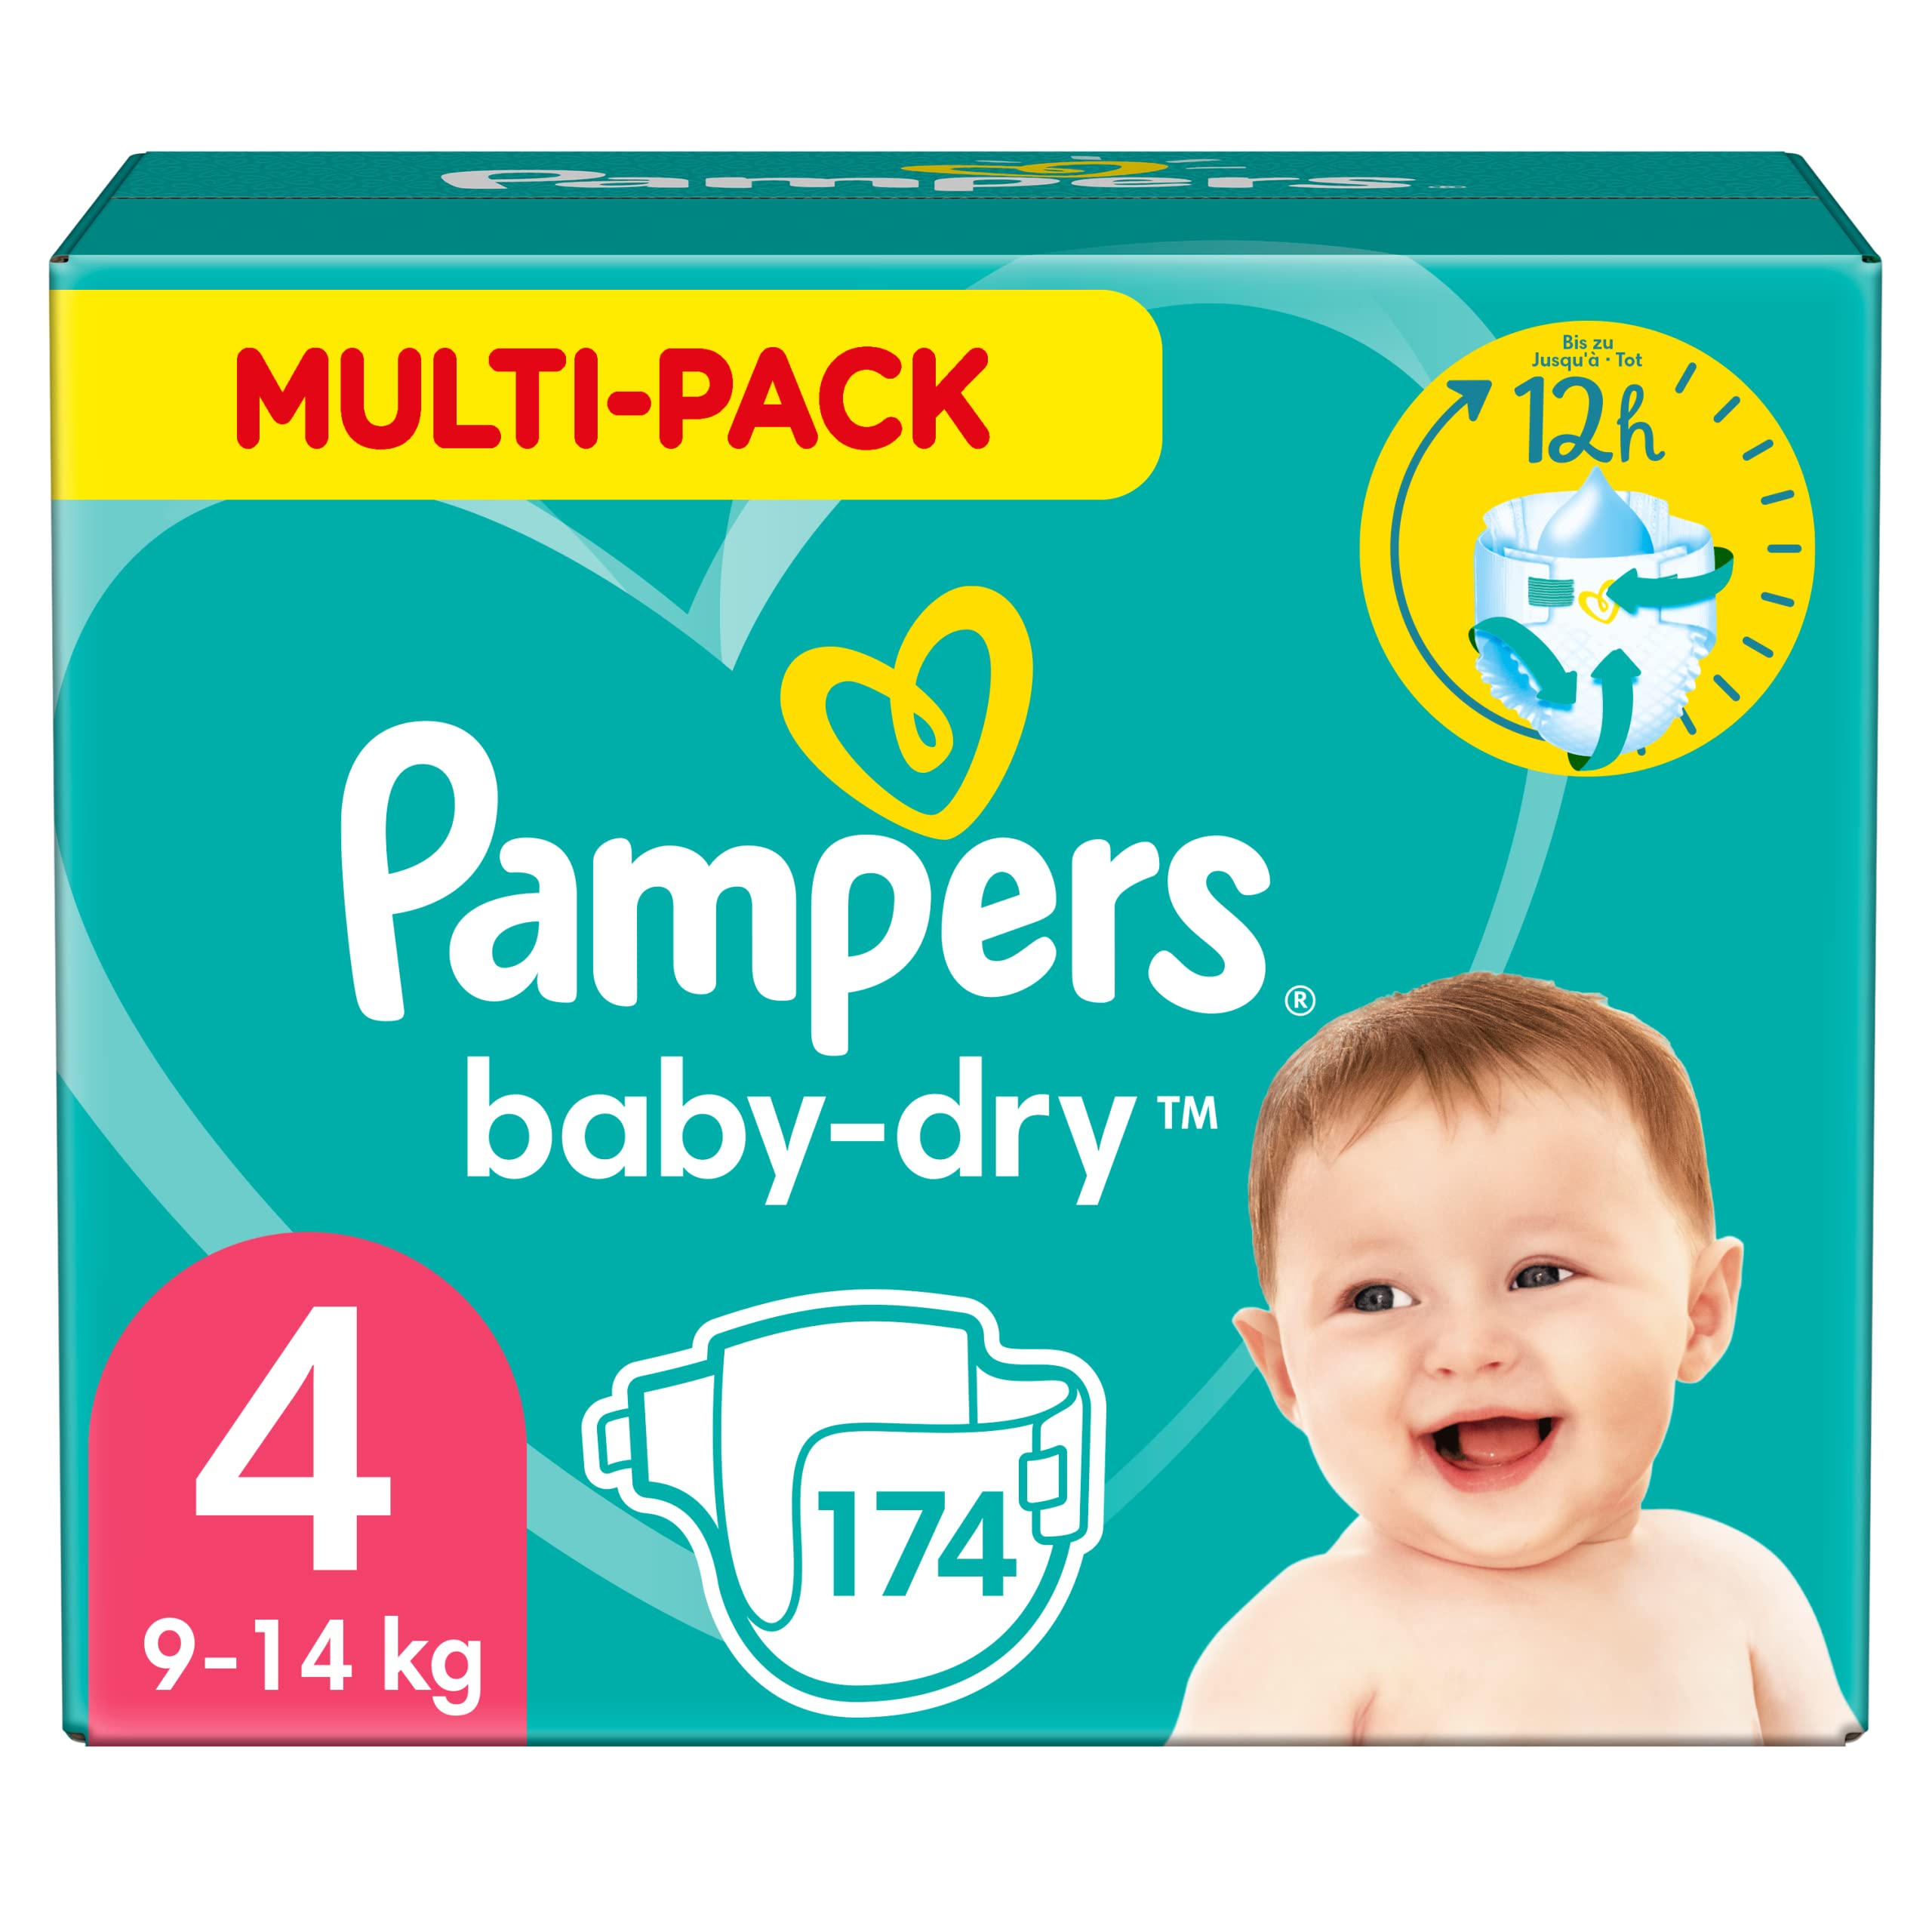 pampers active baby 4 174